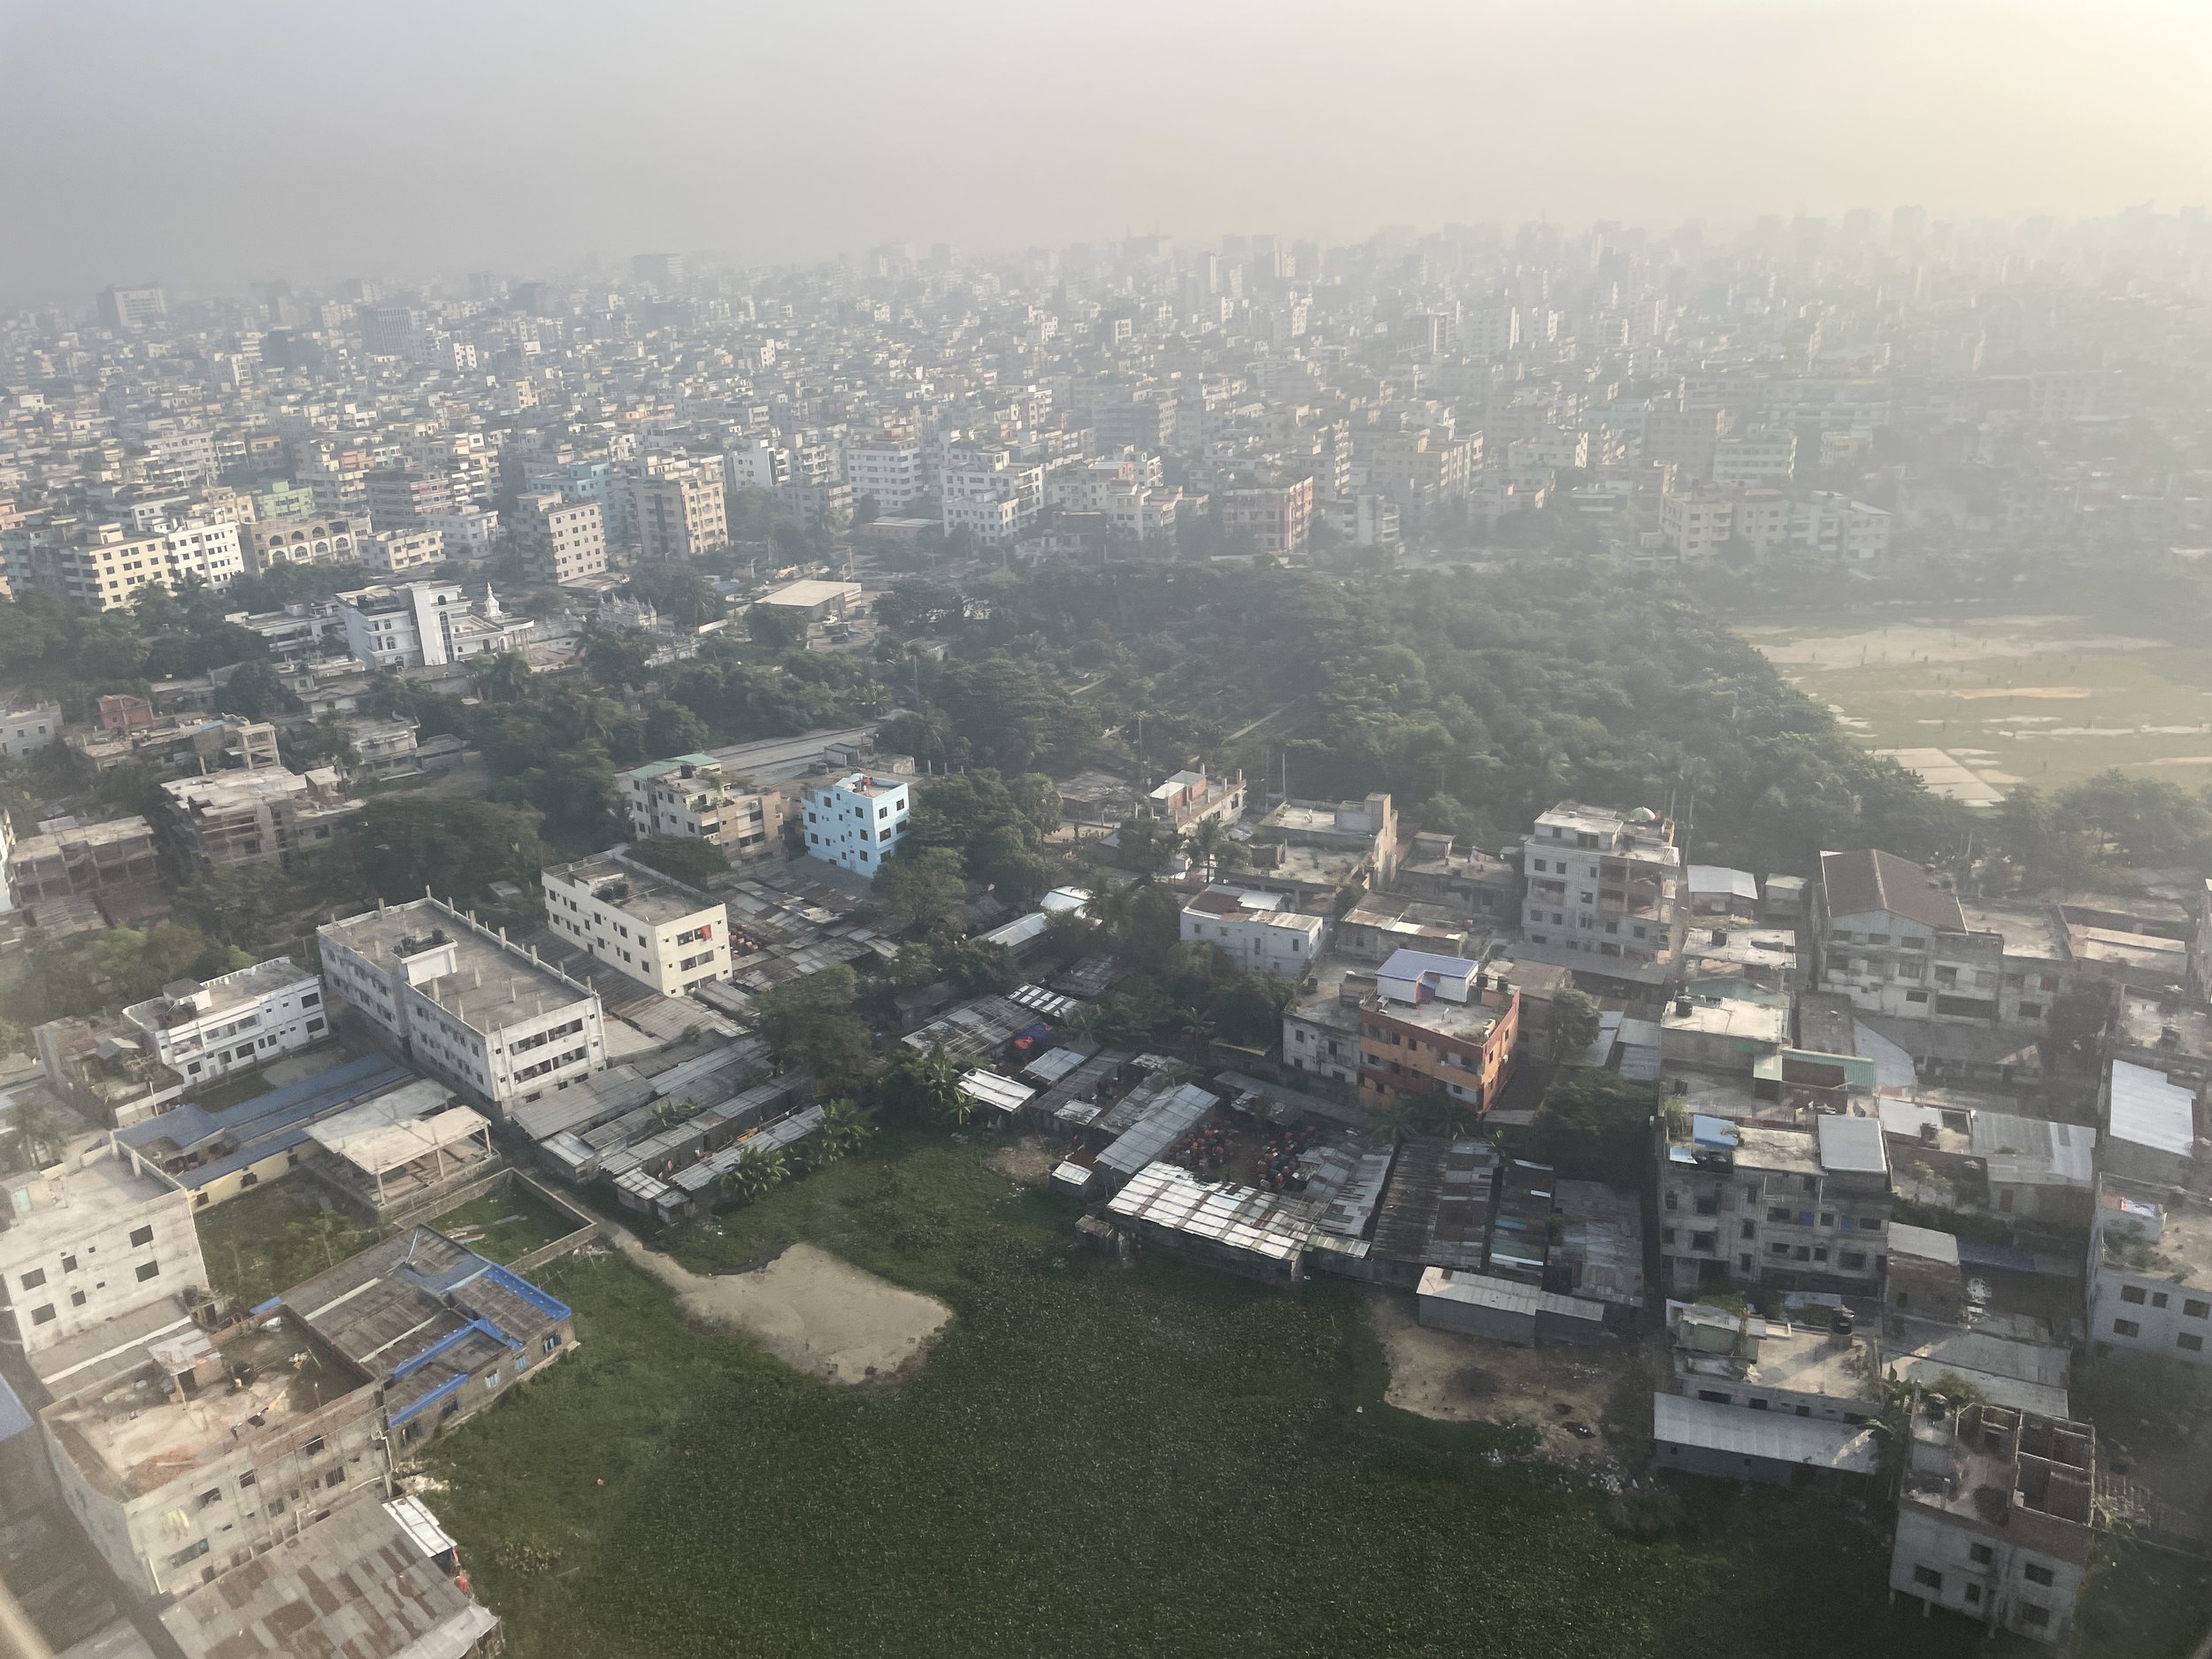 Coming in to land in Dhaka.